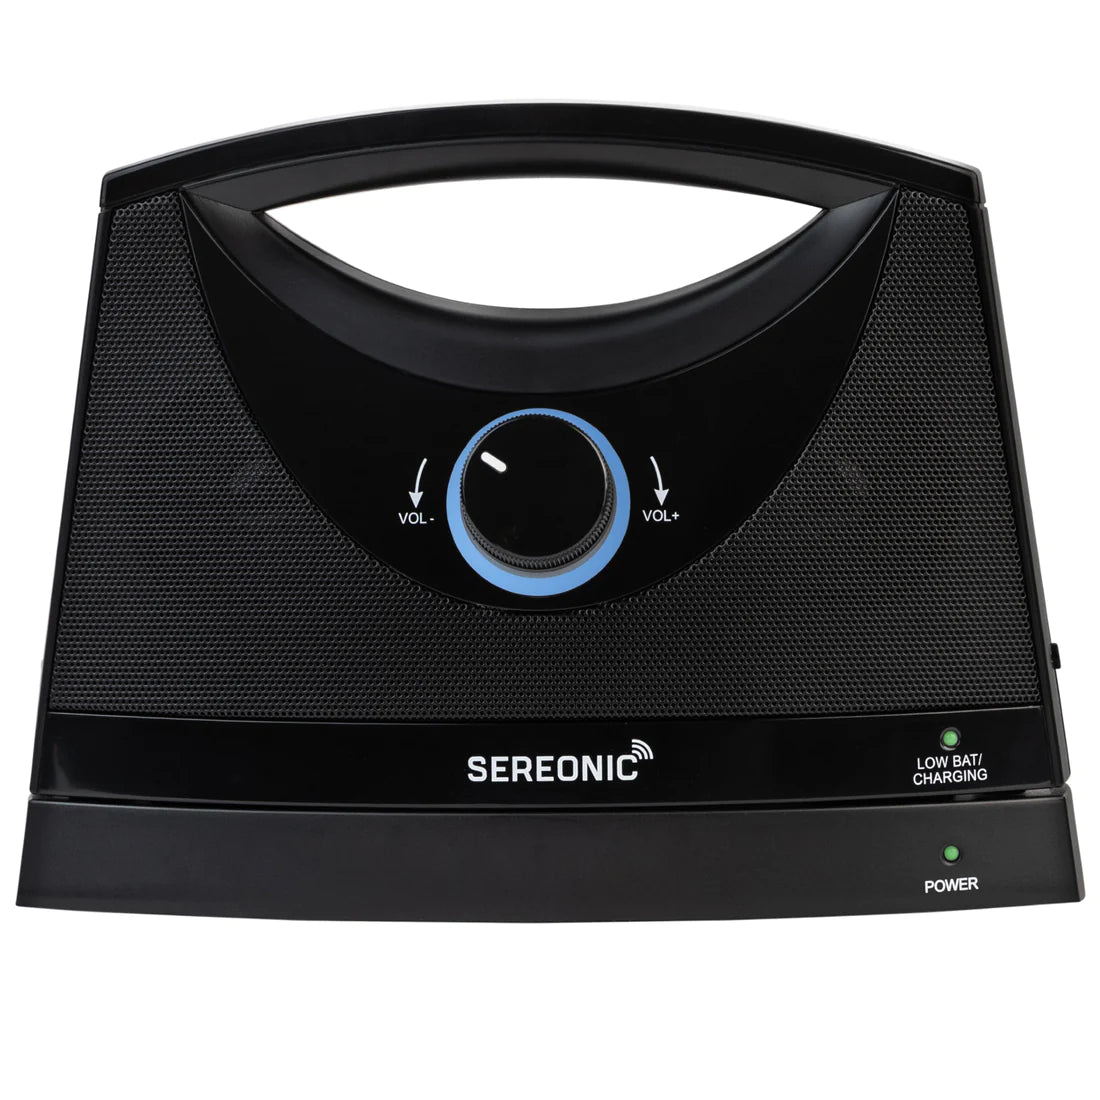 SEREONIC TV Speakers - Wireless speakers for tv surround sound - TV speakers Bluetooth wireless Sound Amplifier for Hearing Impaired, Portable Speaker for Seniors - speakers for TV BT-200SEREONICBT200 Portable SoundBox Wireless TV Speaker